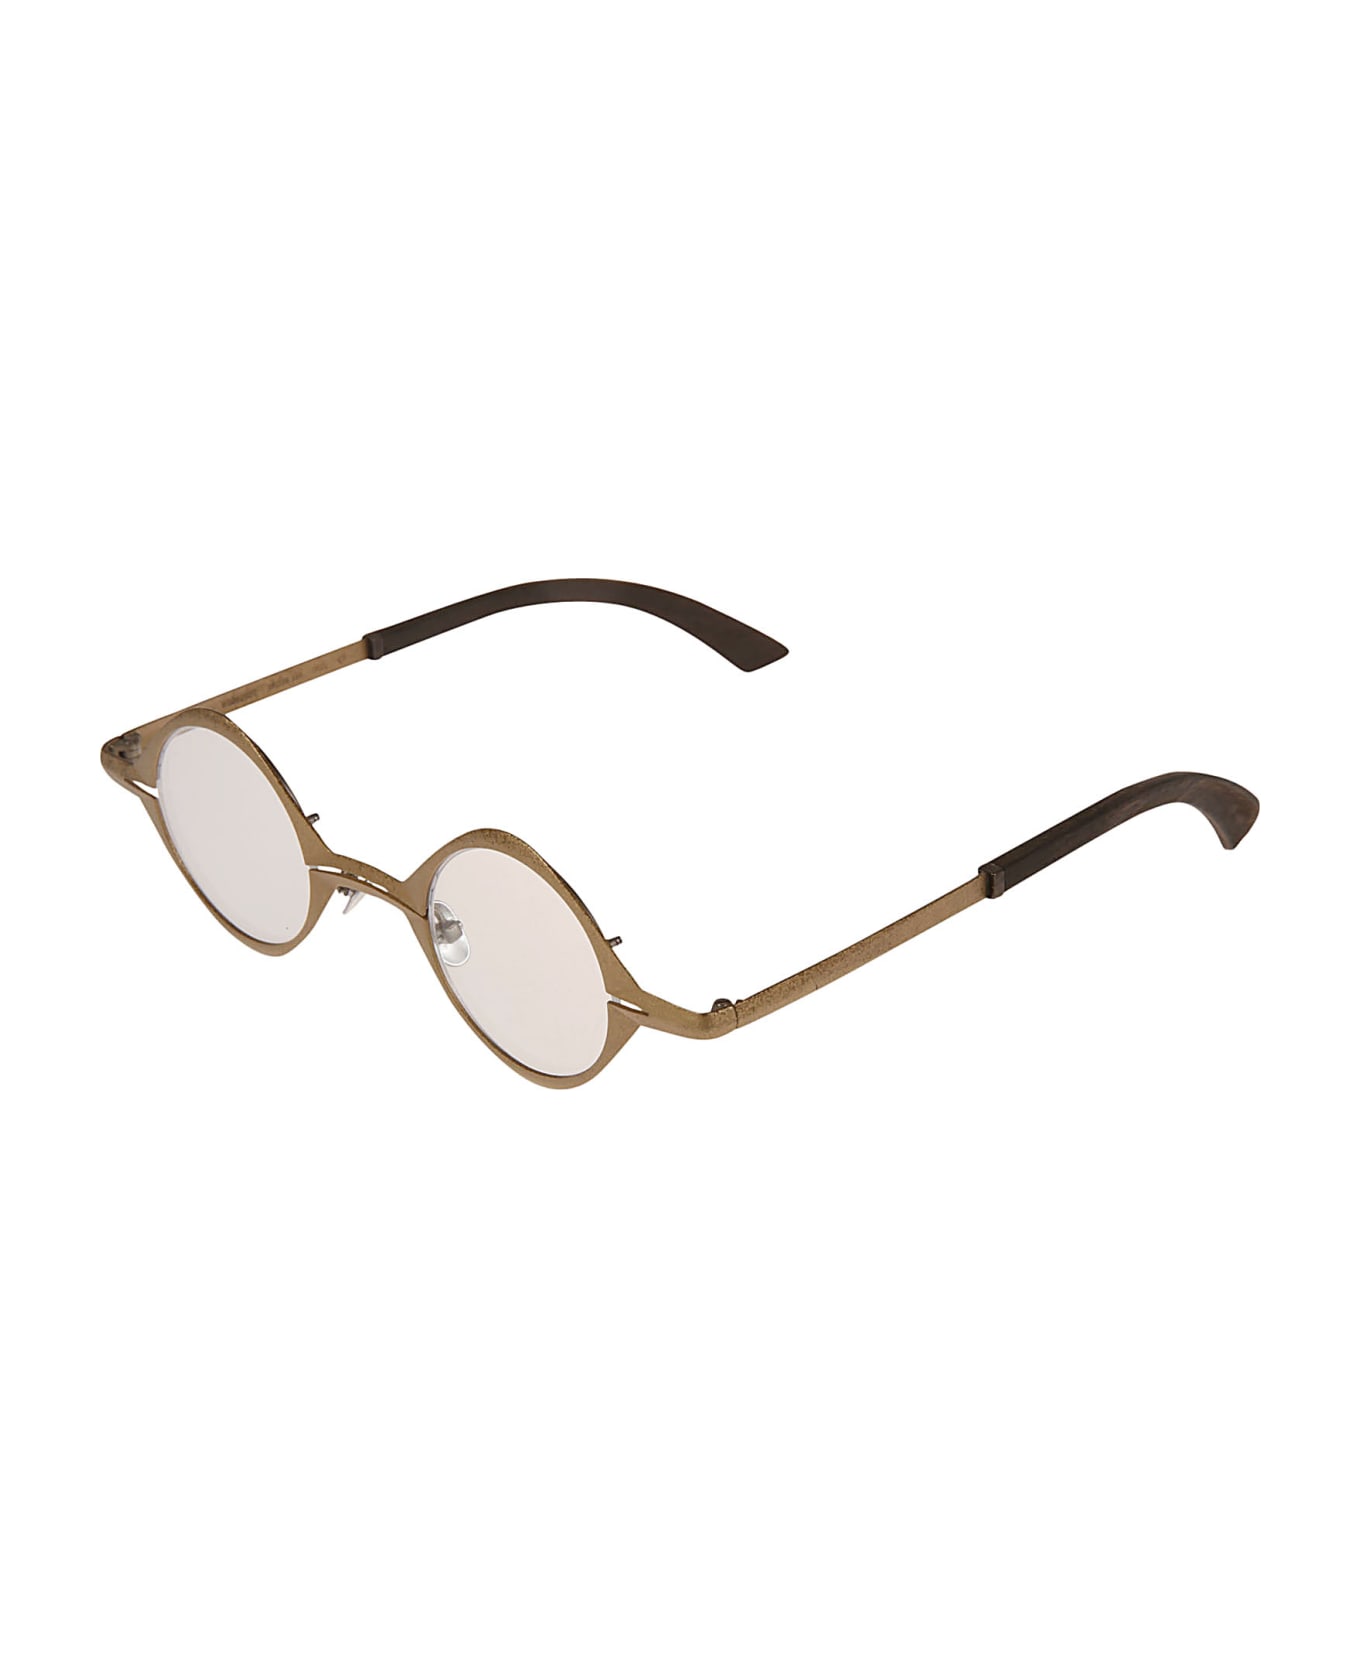 RIGARDS Leather Detail Round Glasses - Gold アイウェア